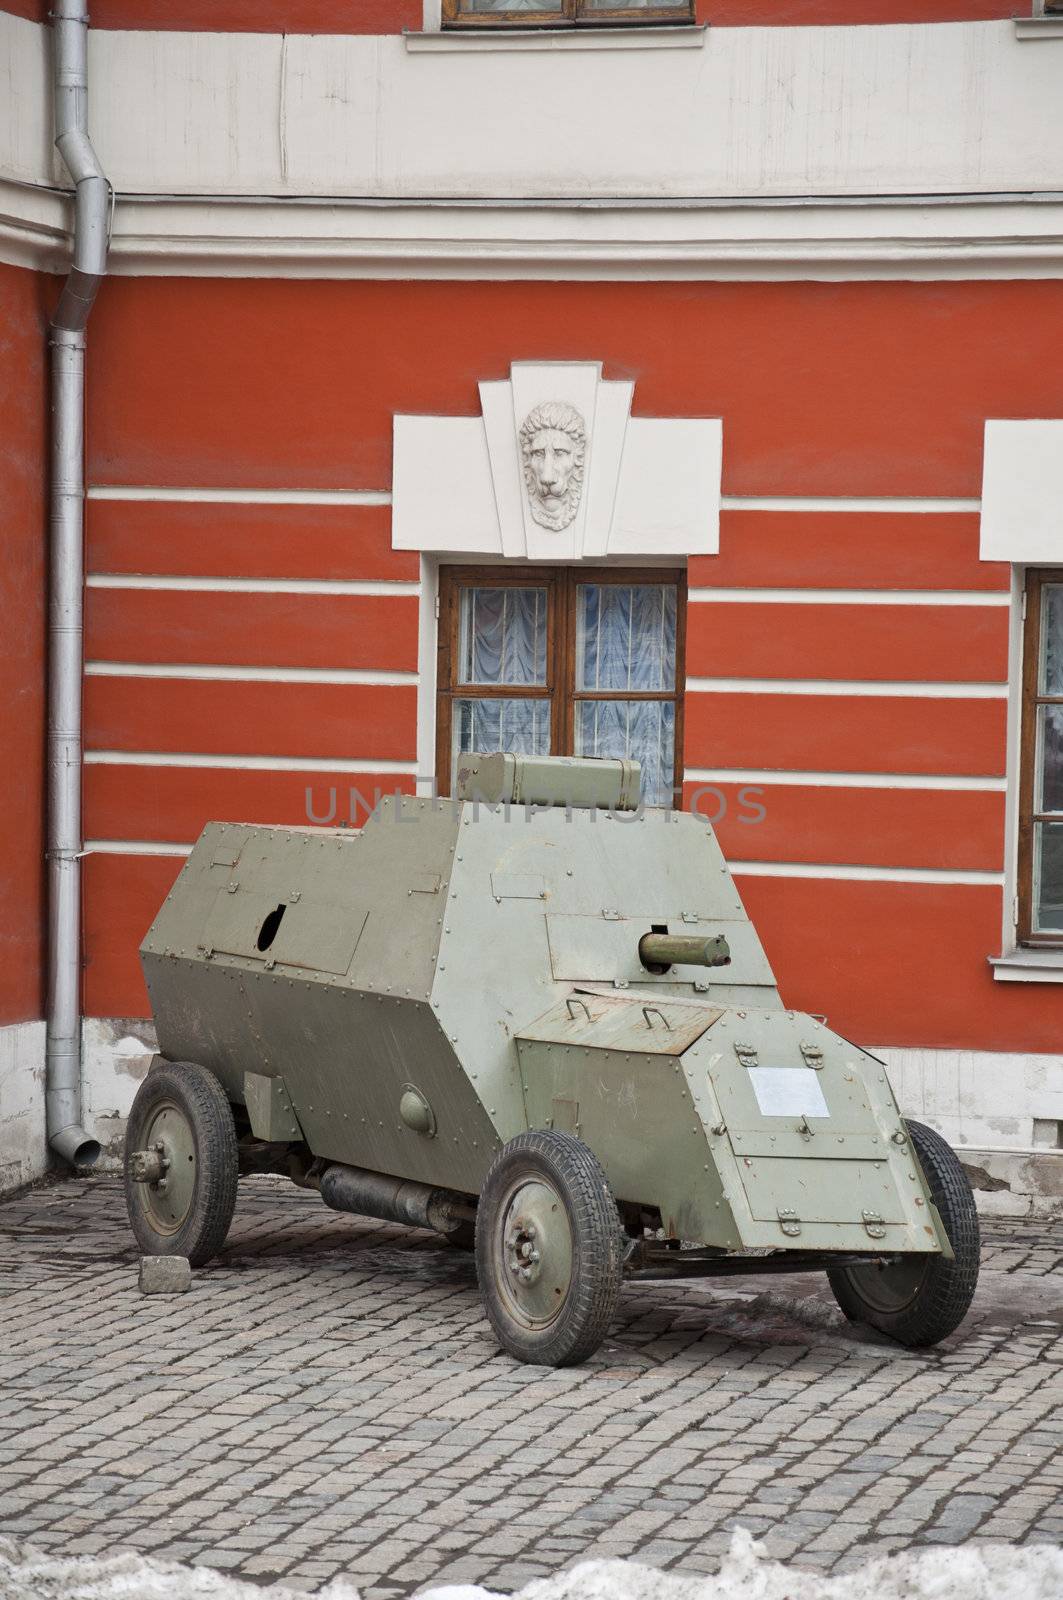 armored truck during historical reenactment of WWII